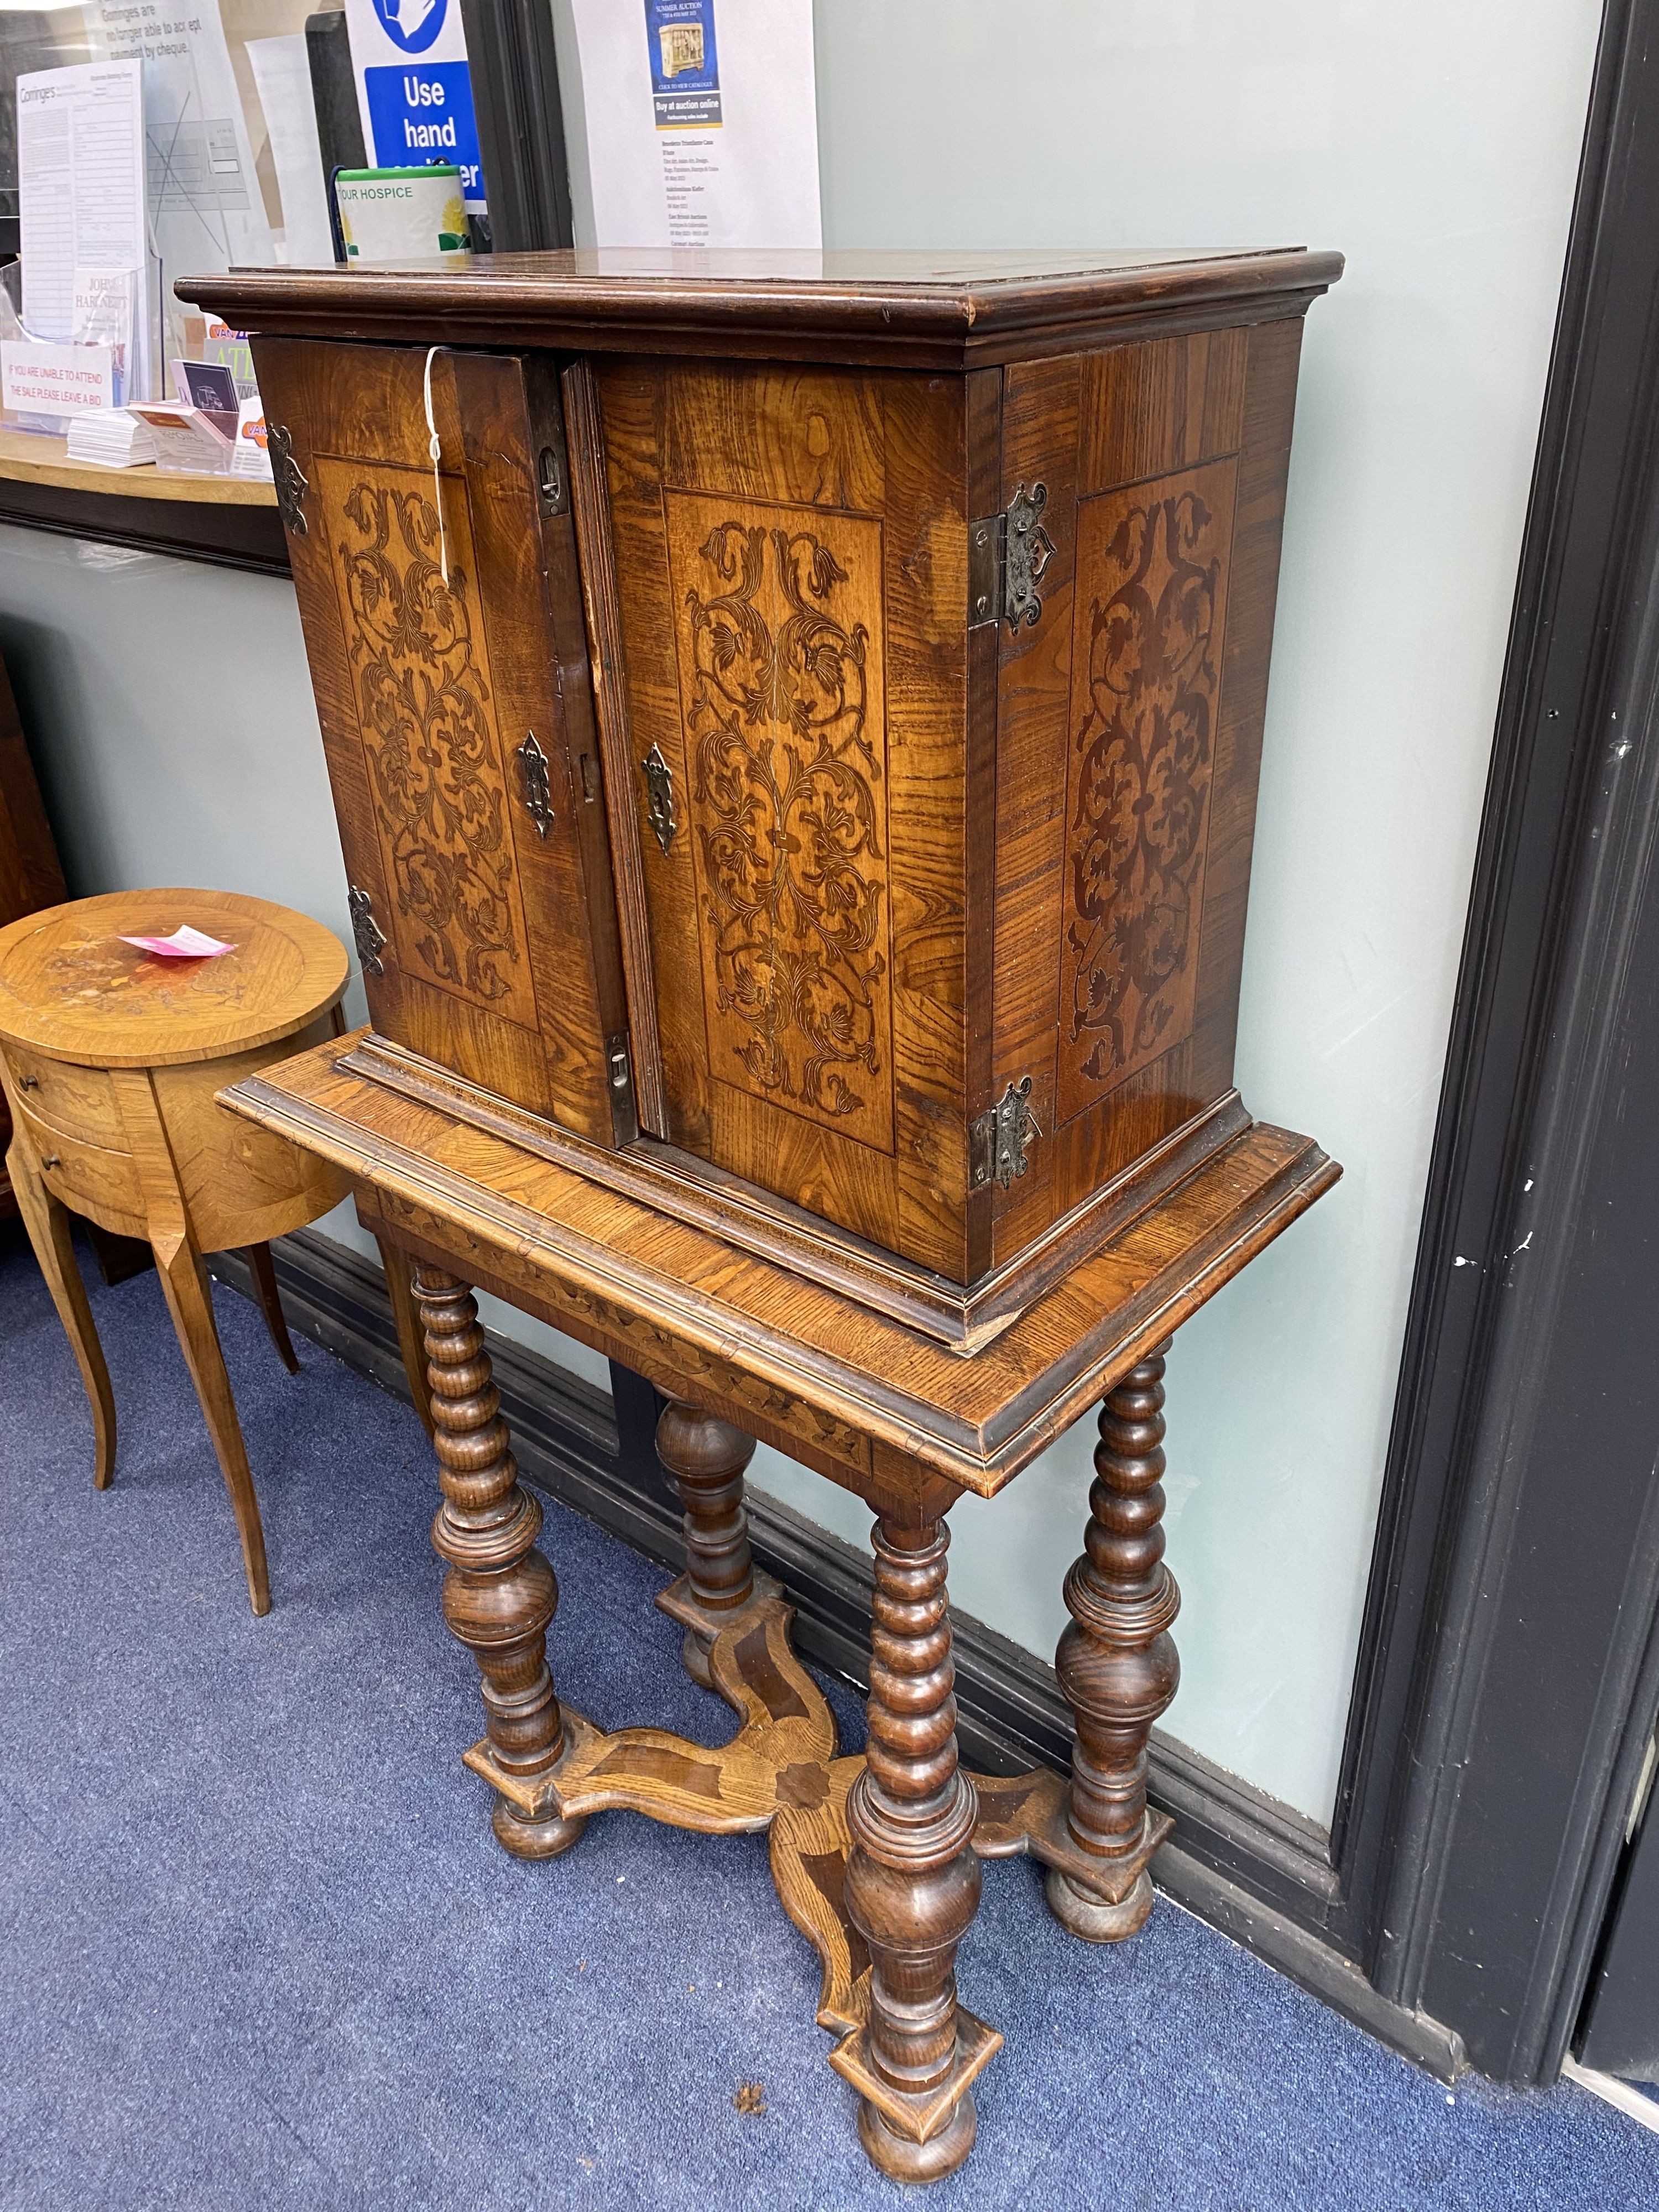 A Continental marquetry cabinet on stand, width 65cm, depth 36cm, height 126cm